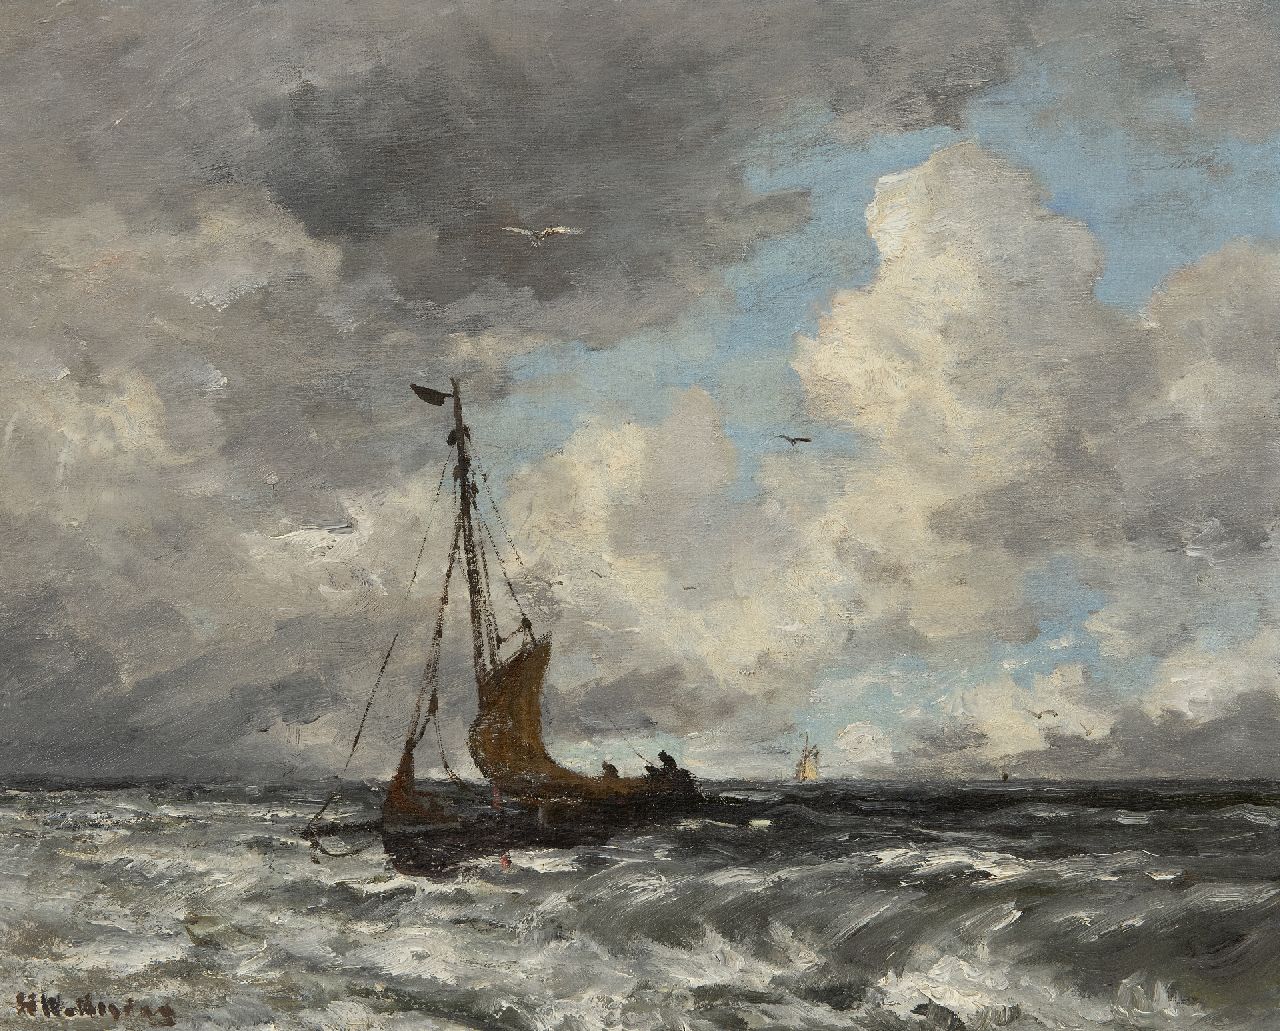 Mesdag H.W.  | Hendrik Willem Mesdag, Fishing smack on the North Sea, oil on canvas laid down on board 40.2 x 50.6 cm, signed l.l.